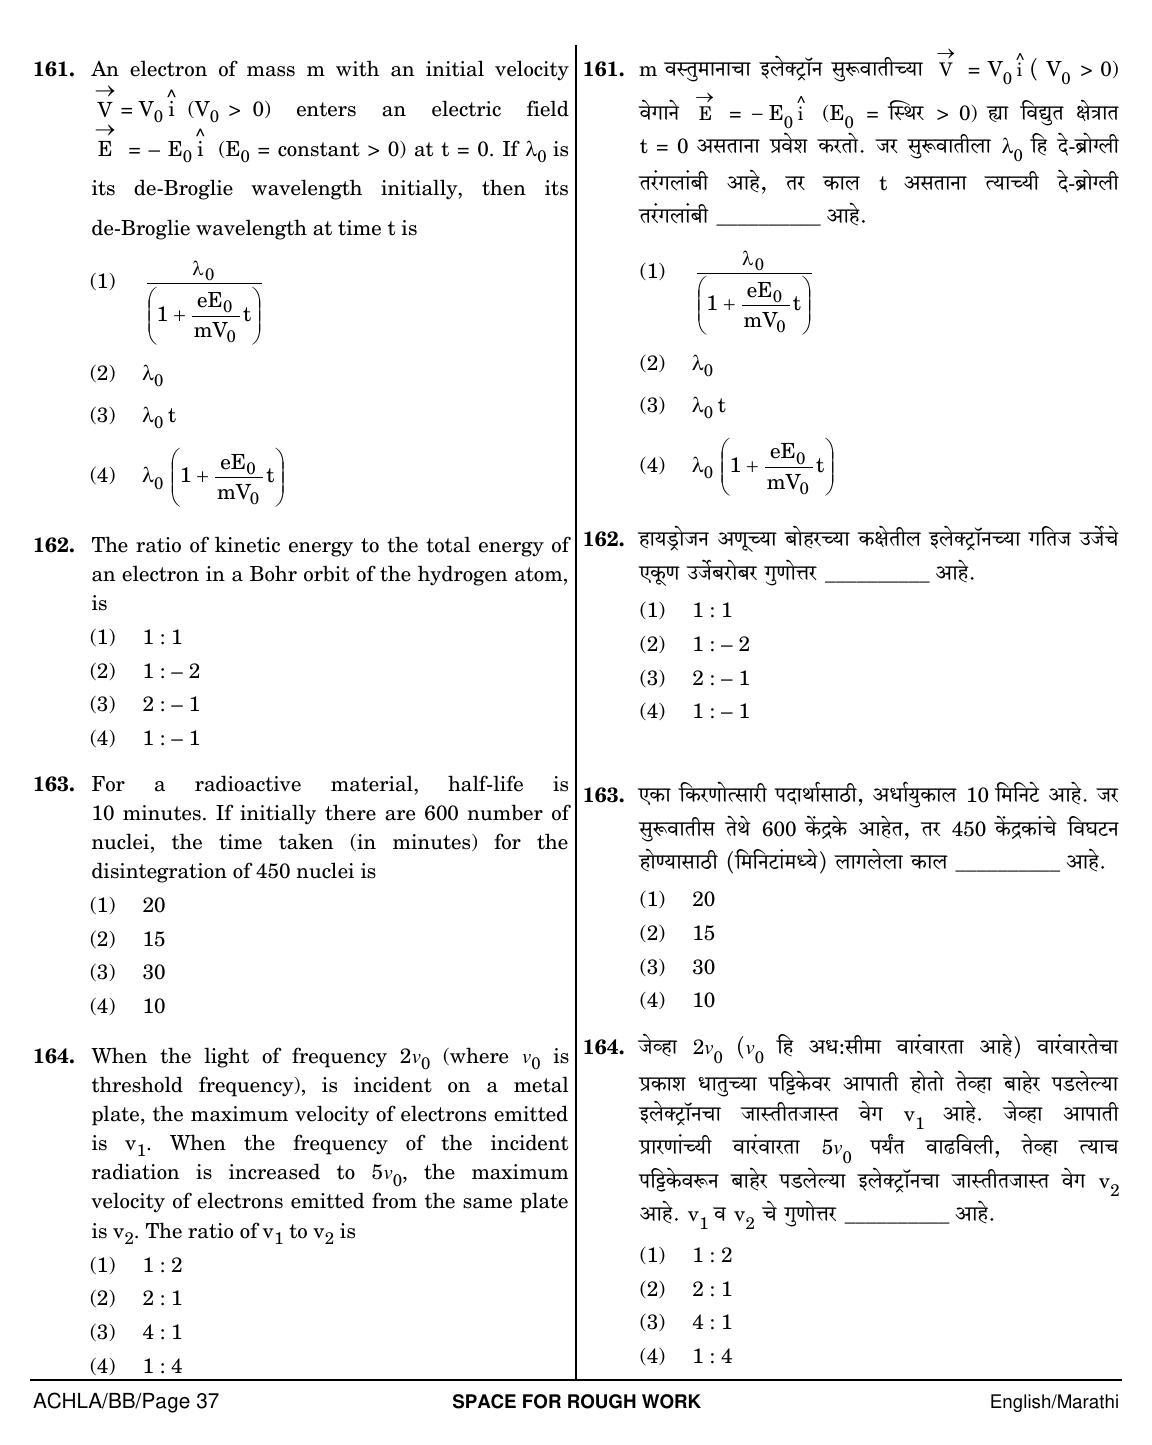 NEET Marathi BB 2018 Question Paper - Page 37